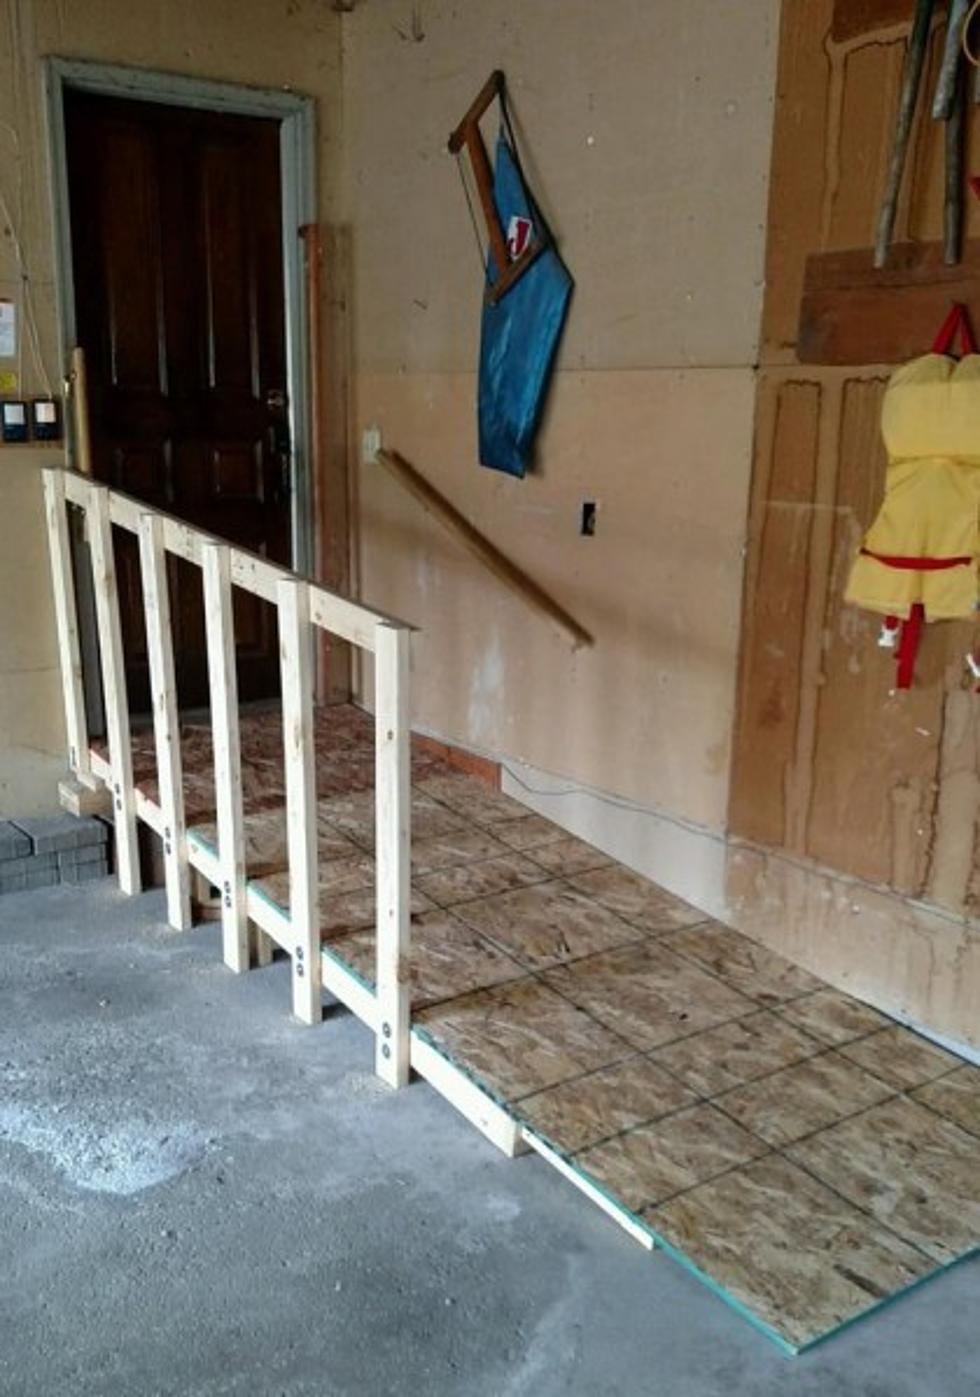 Lakeville Police Officer Builds Ramp for Couple